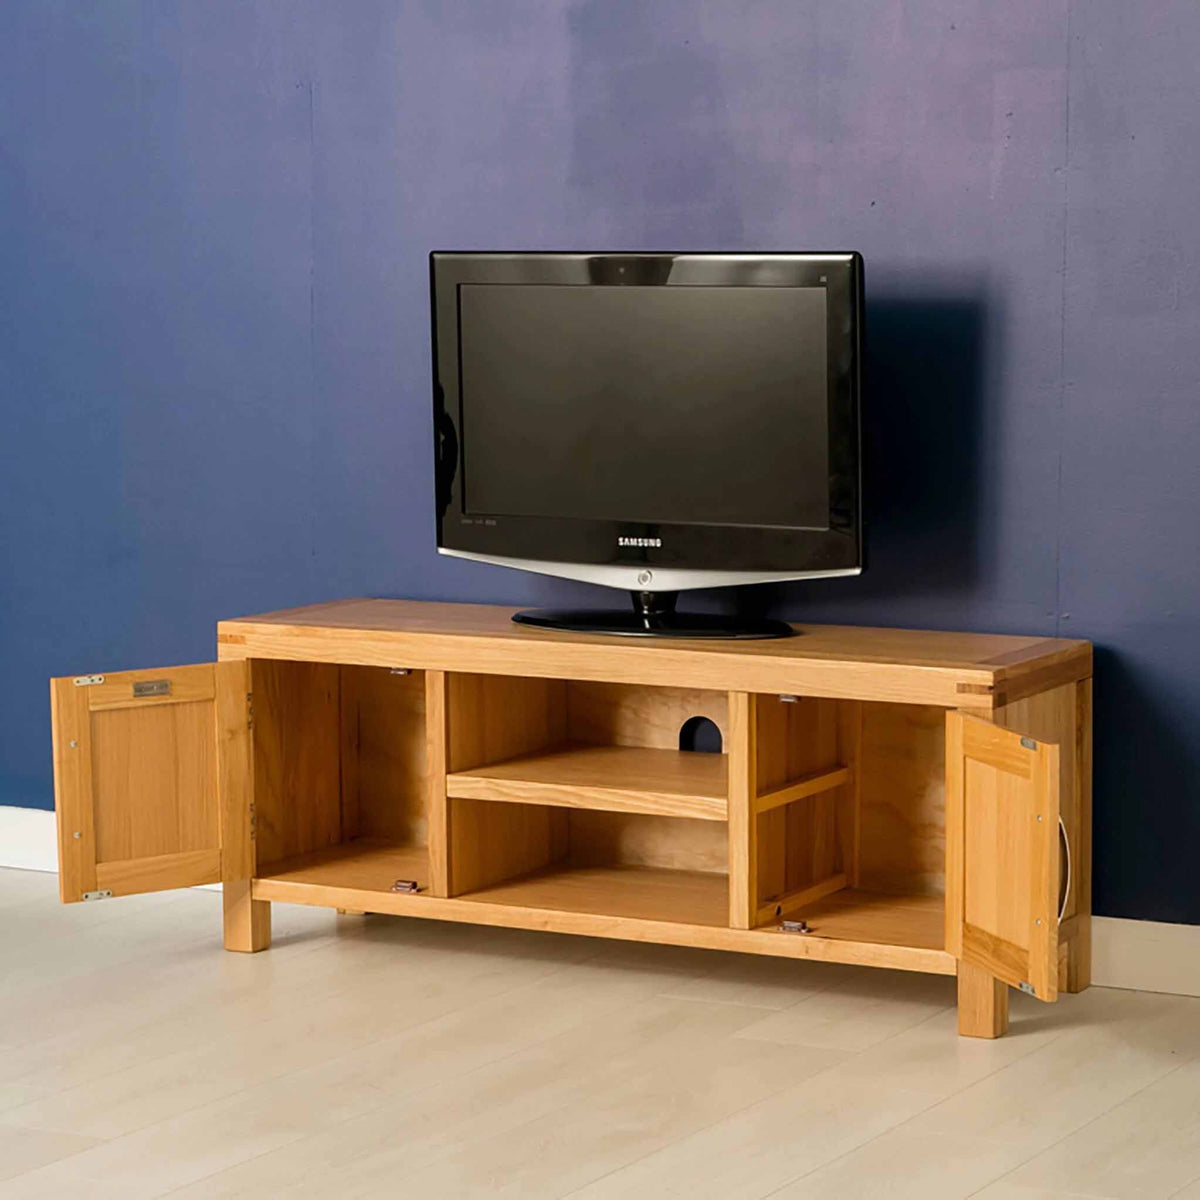 Inside view of the Abbey Light Oak Large Television Stand  - Lifestyle with doors open